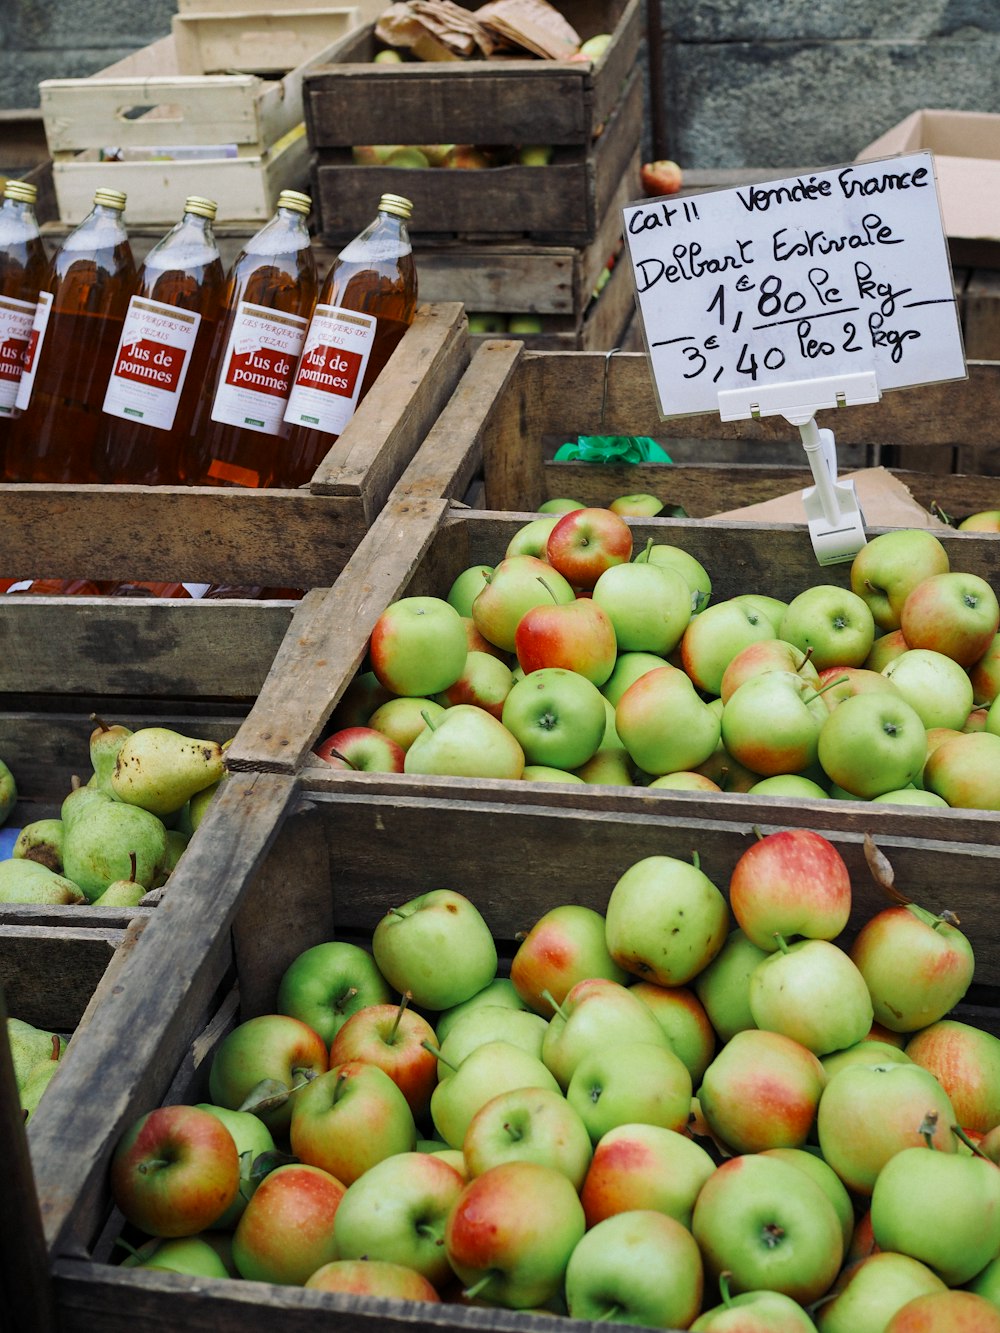 a display of apples for sale at a market